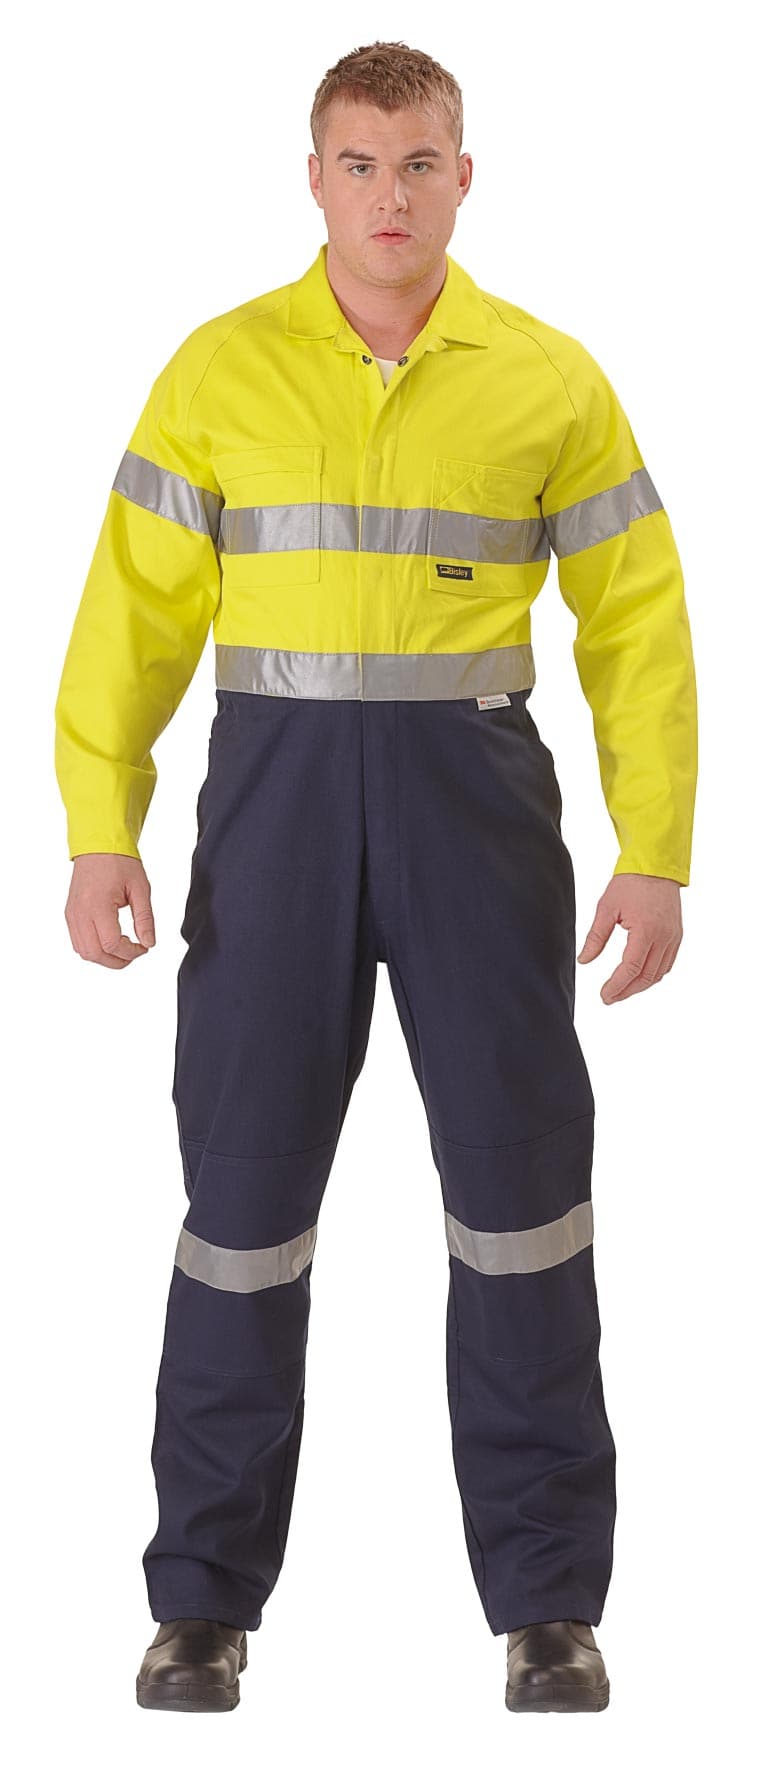 Bisley 2 Tone Hi Vis Lightweight Coveralls 3M Reflective Tape - Yellow/Navy (BC6719TW) - Trade Wear